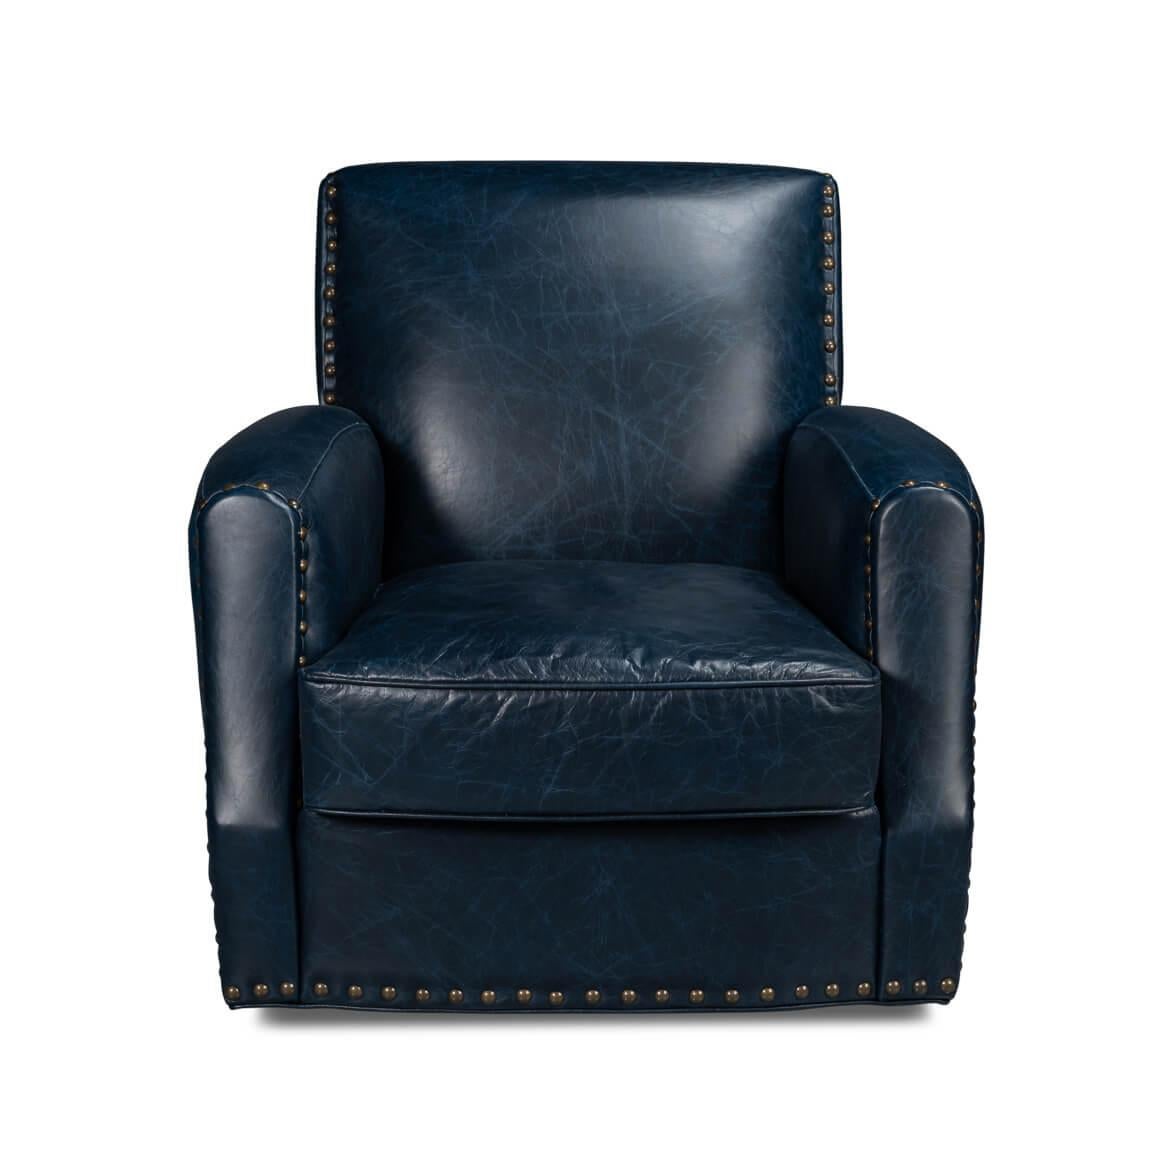 A classic style Chateau Blue leather upholstered armchair, upholstered with pure aniline top grade leather, with large nailhead details on a swivel base.

Dimensions: 32